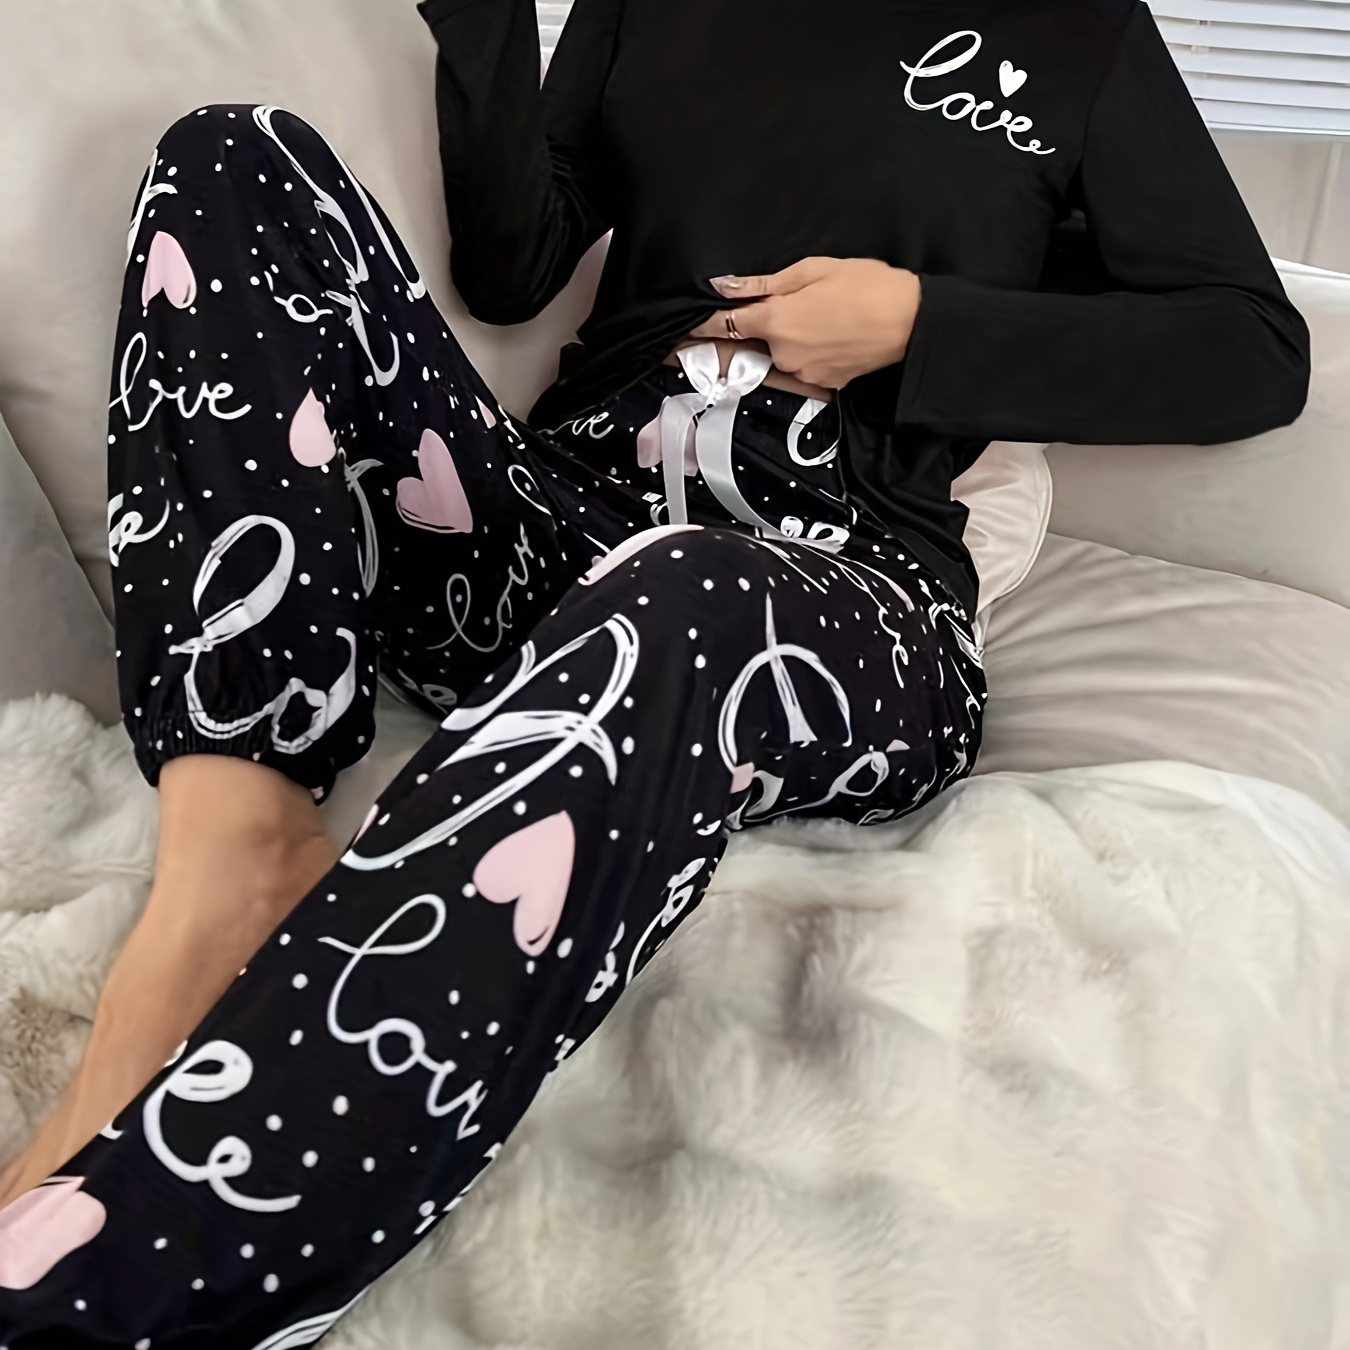 

Women's Heart & Letter Print Casual Pajama Set, Long Sleeve Round Neck Top & Pants, Comfortable Relaxed Fit, Summer Nightwear For Fall/ Winter